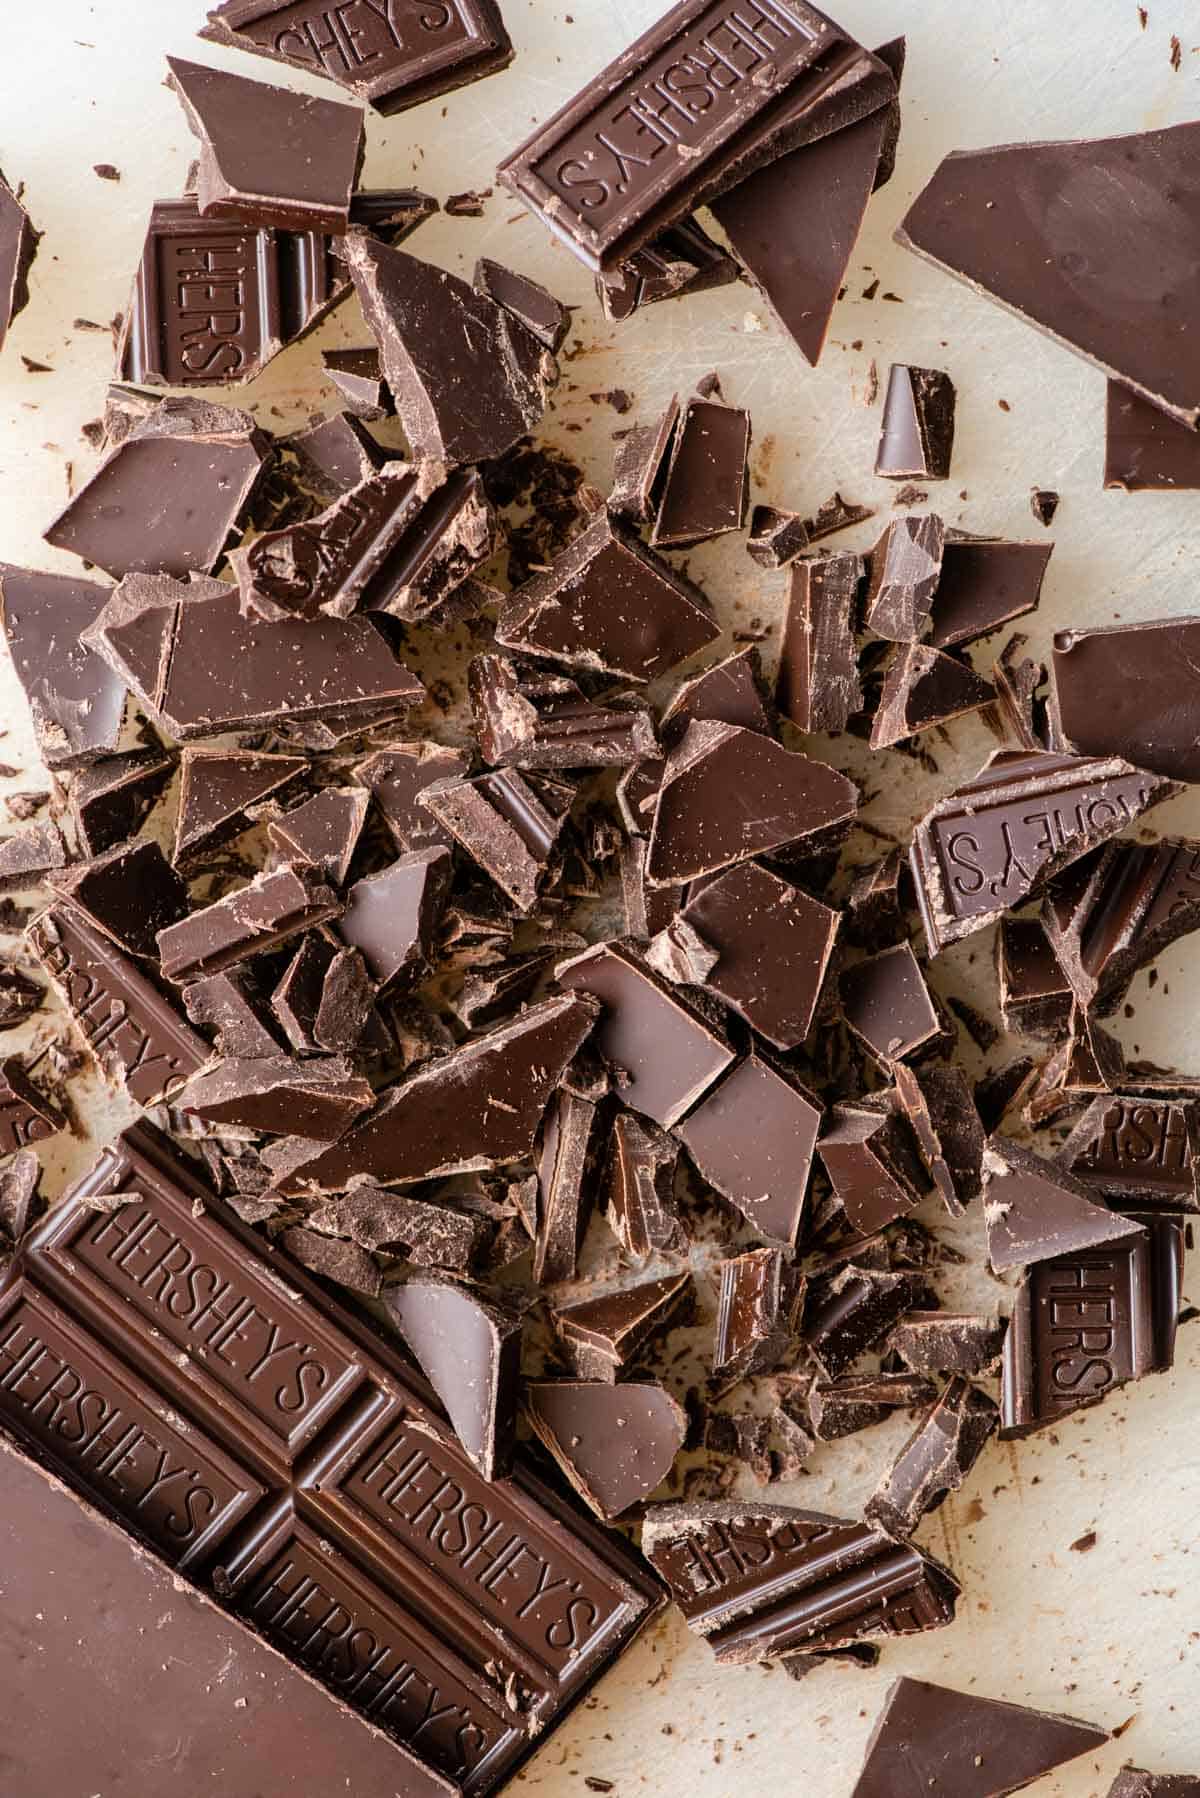 Pieces of chopped chocolate